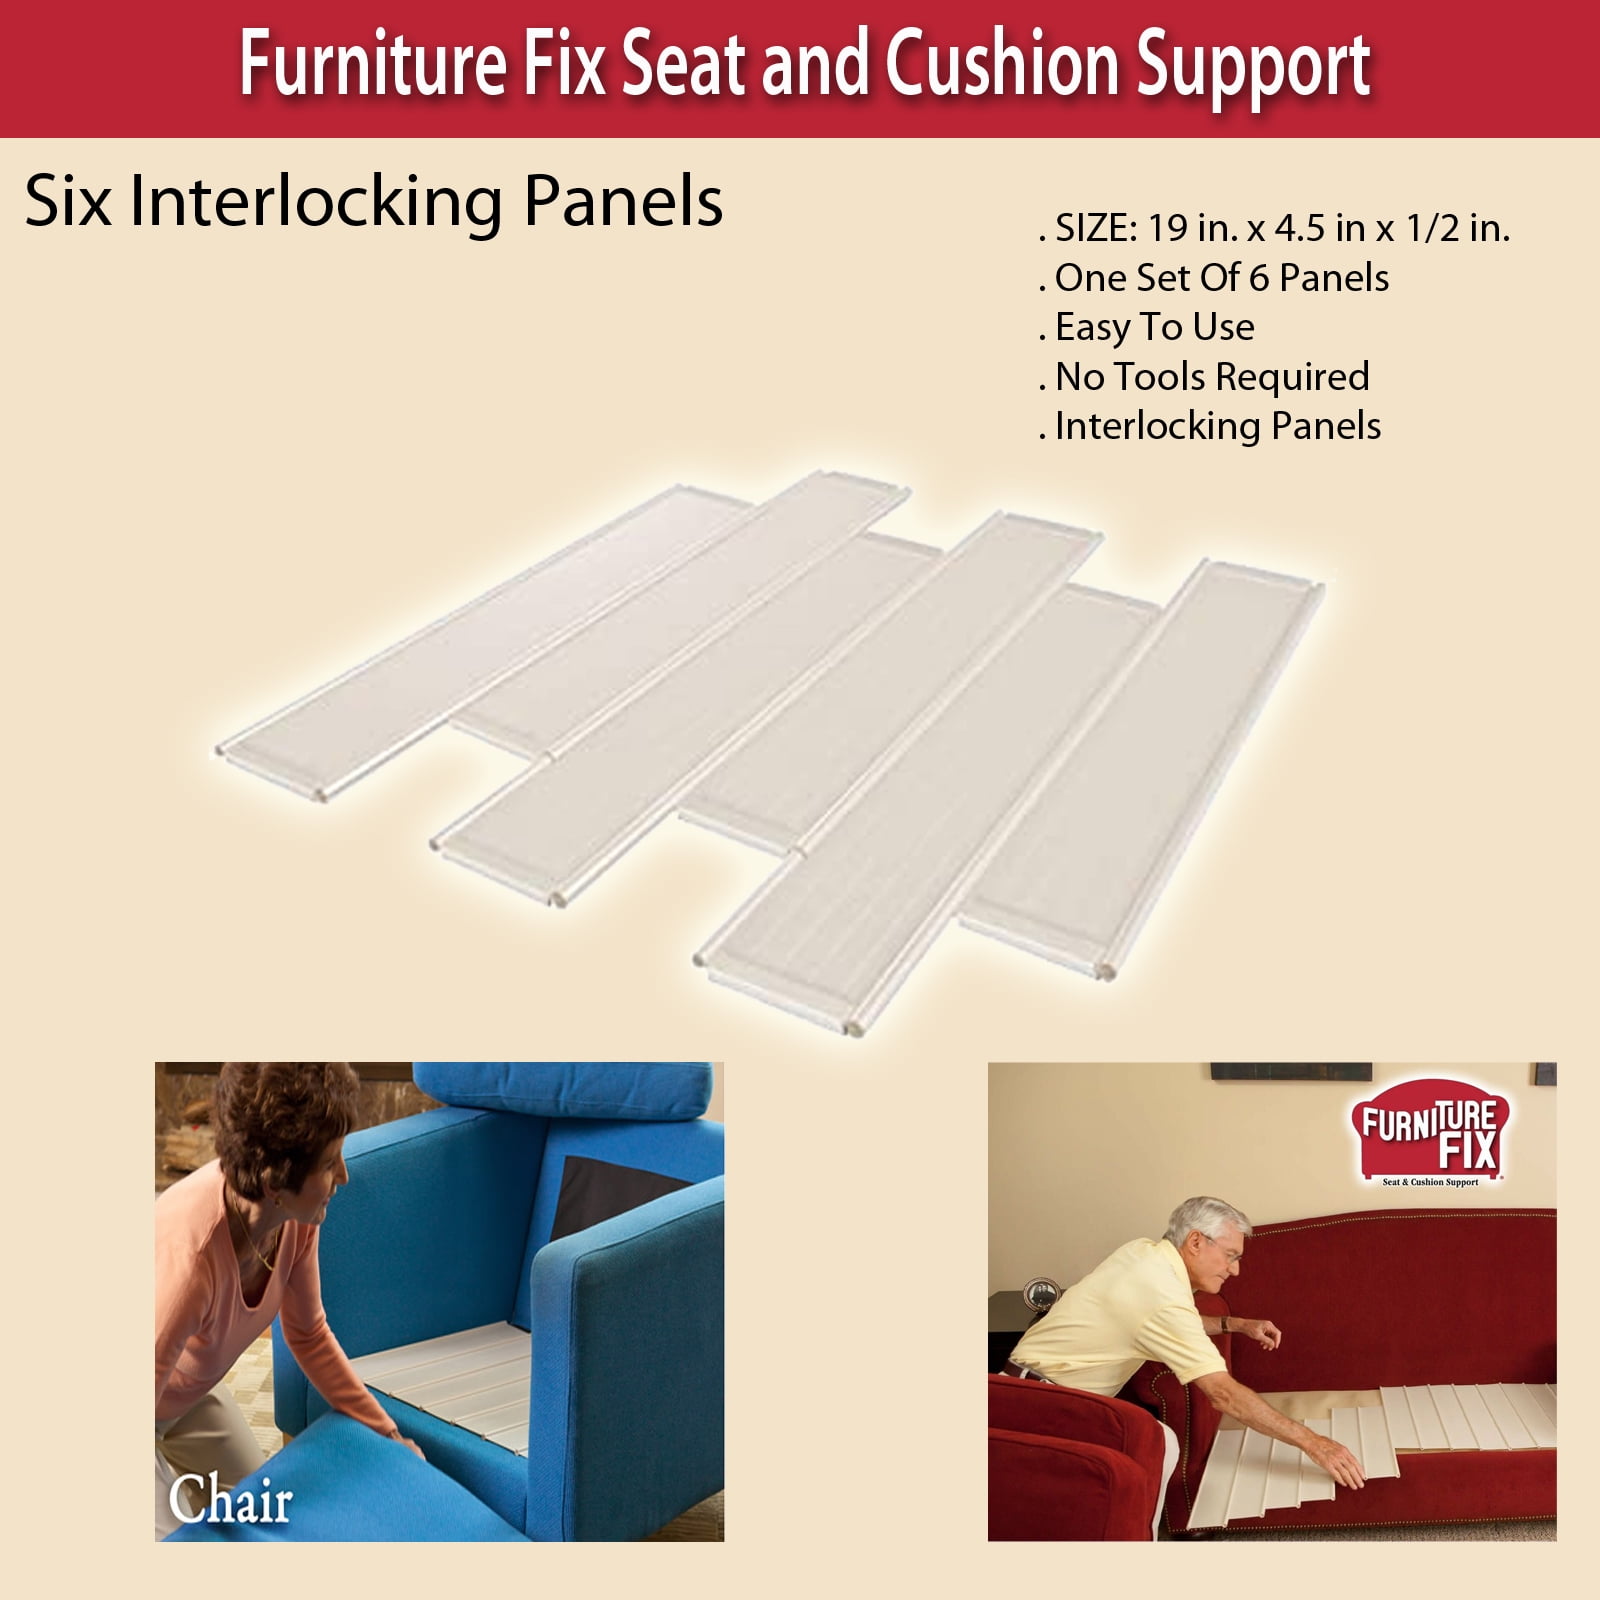 6 Pieces/pack Of Pvc Furniture, Sofa Support Cushion, Fast Fixing